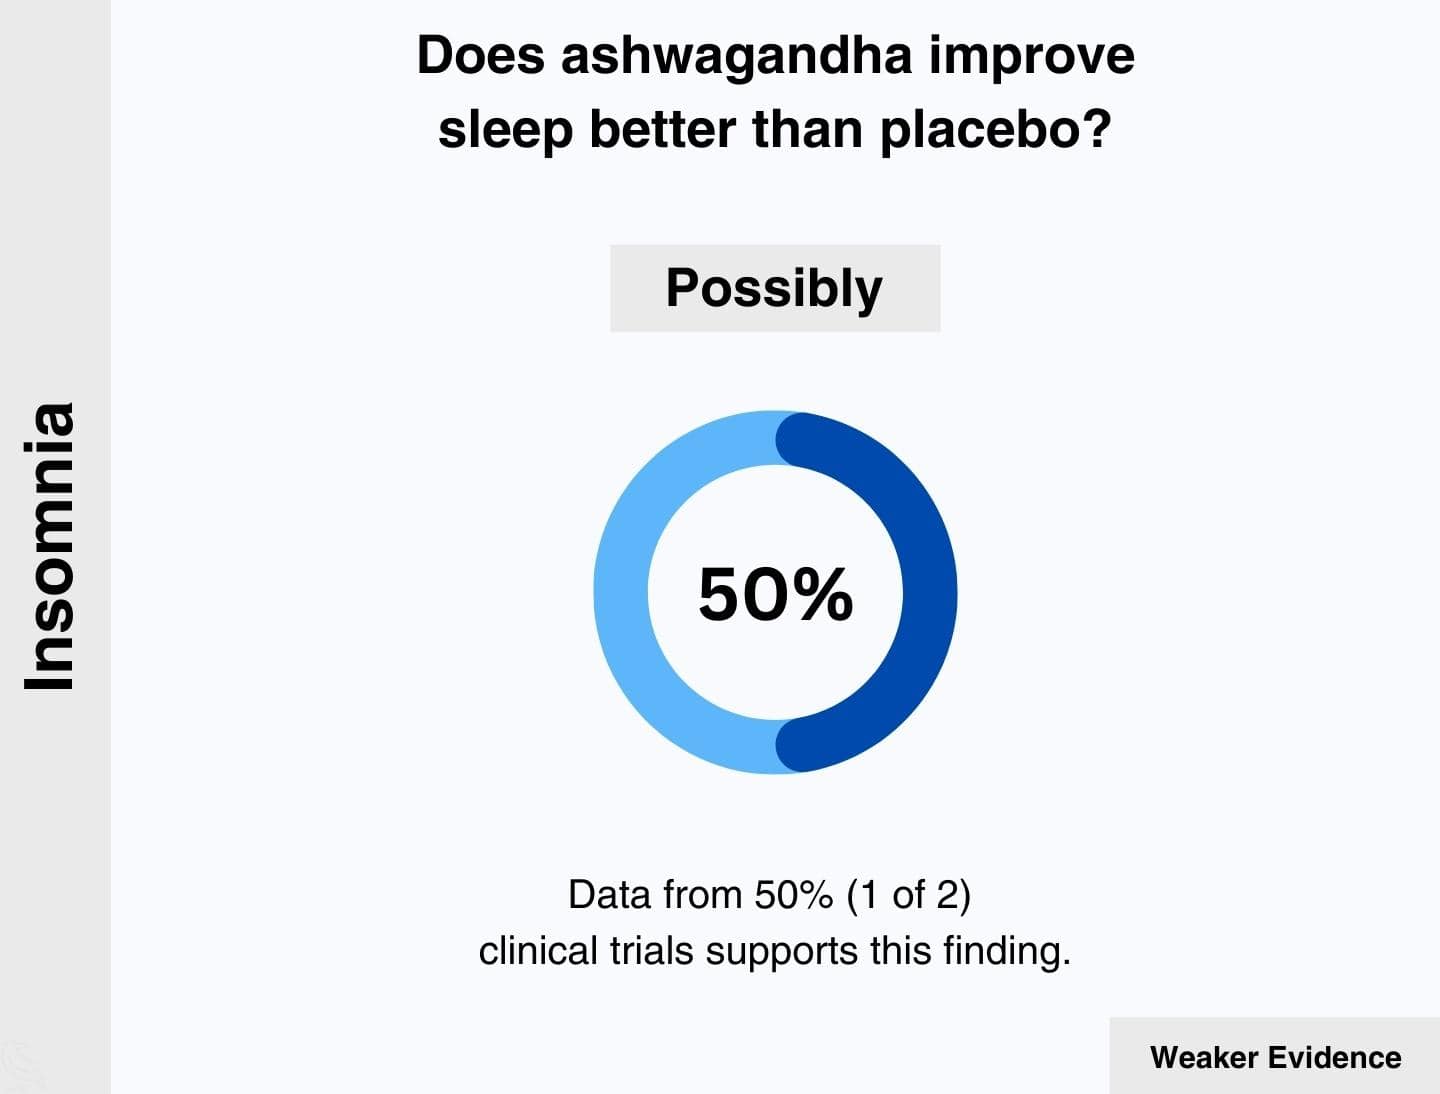 This image shows that 50.0% (1 of 2) clinical trials found that ashwagandha might improve sleep quality significantly better than placebo in adults with insomnia.